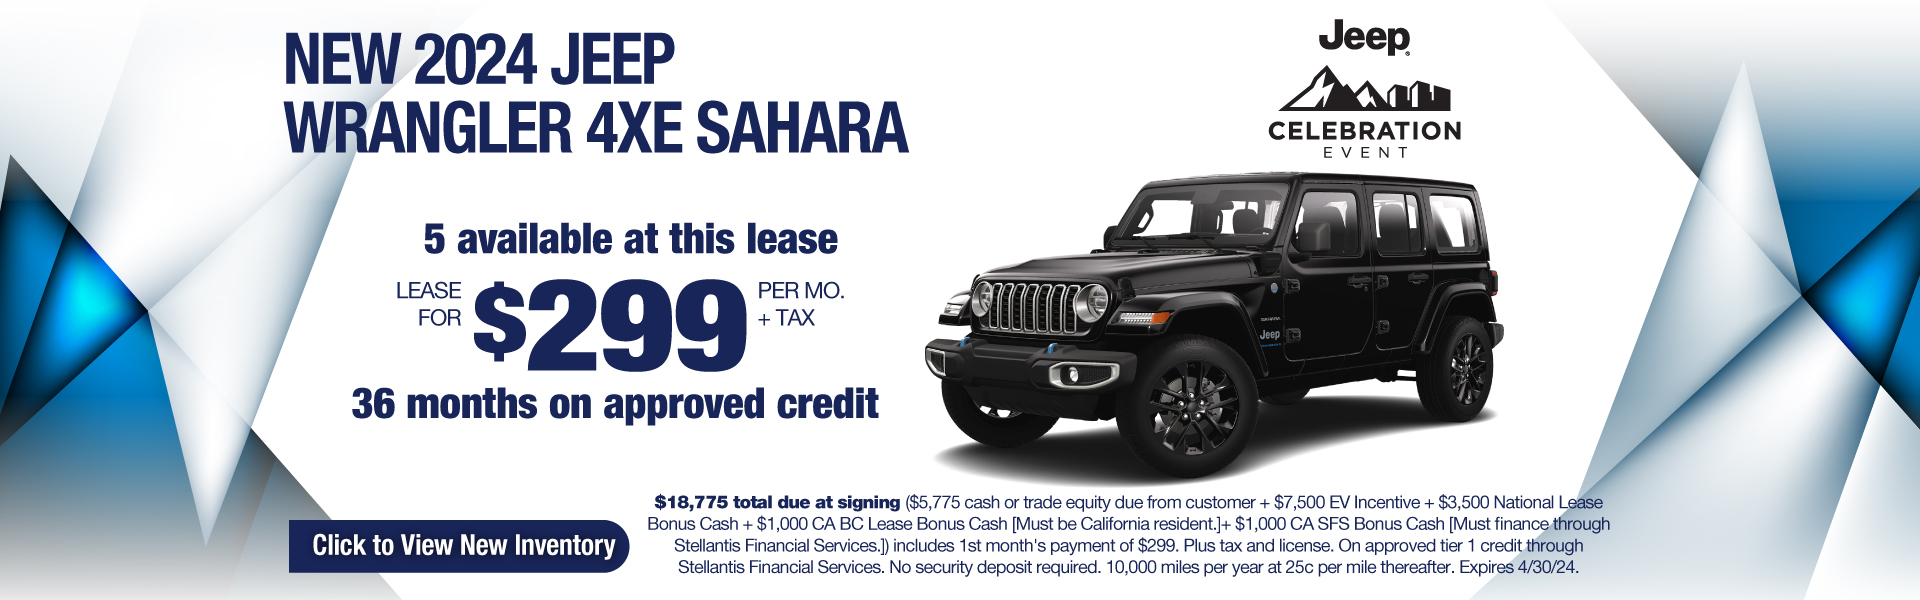 Lease a New 2024 Jeep Wrangler 4xe Sahara for $299 per month plus tax! Expires 4/30/24.